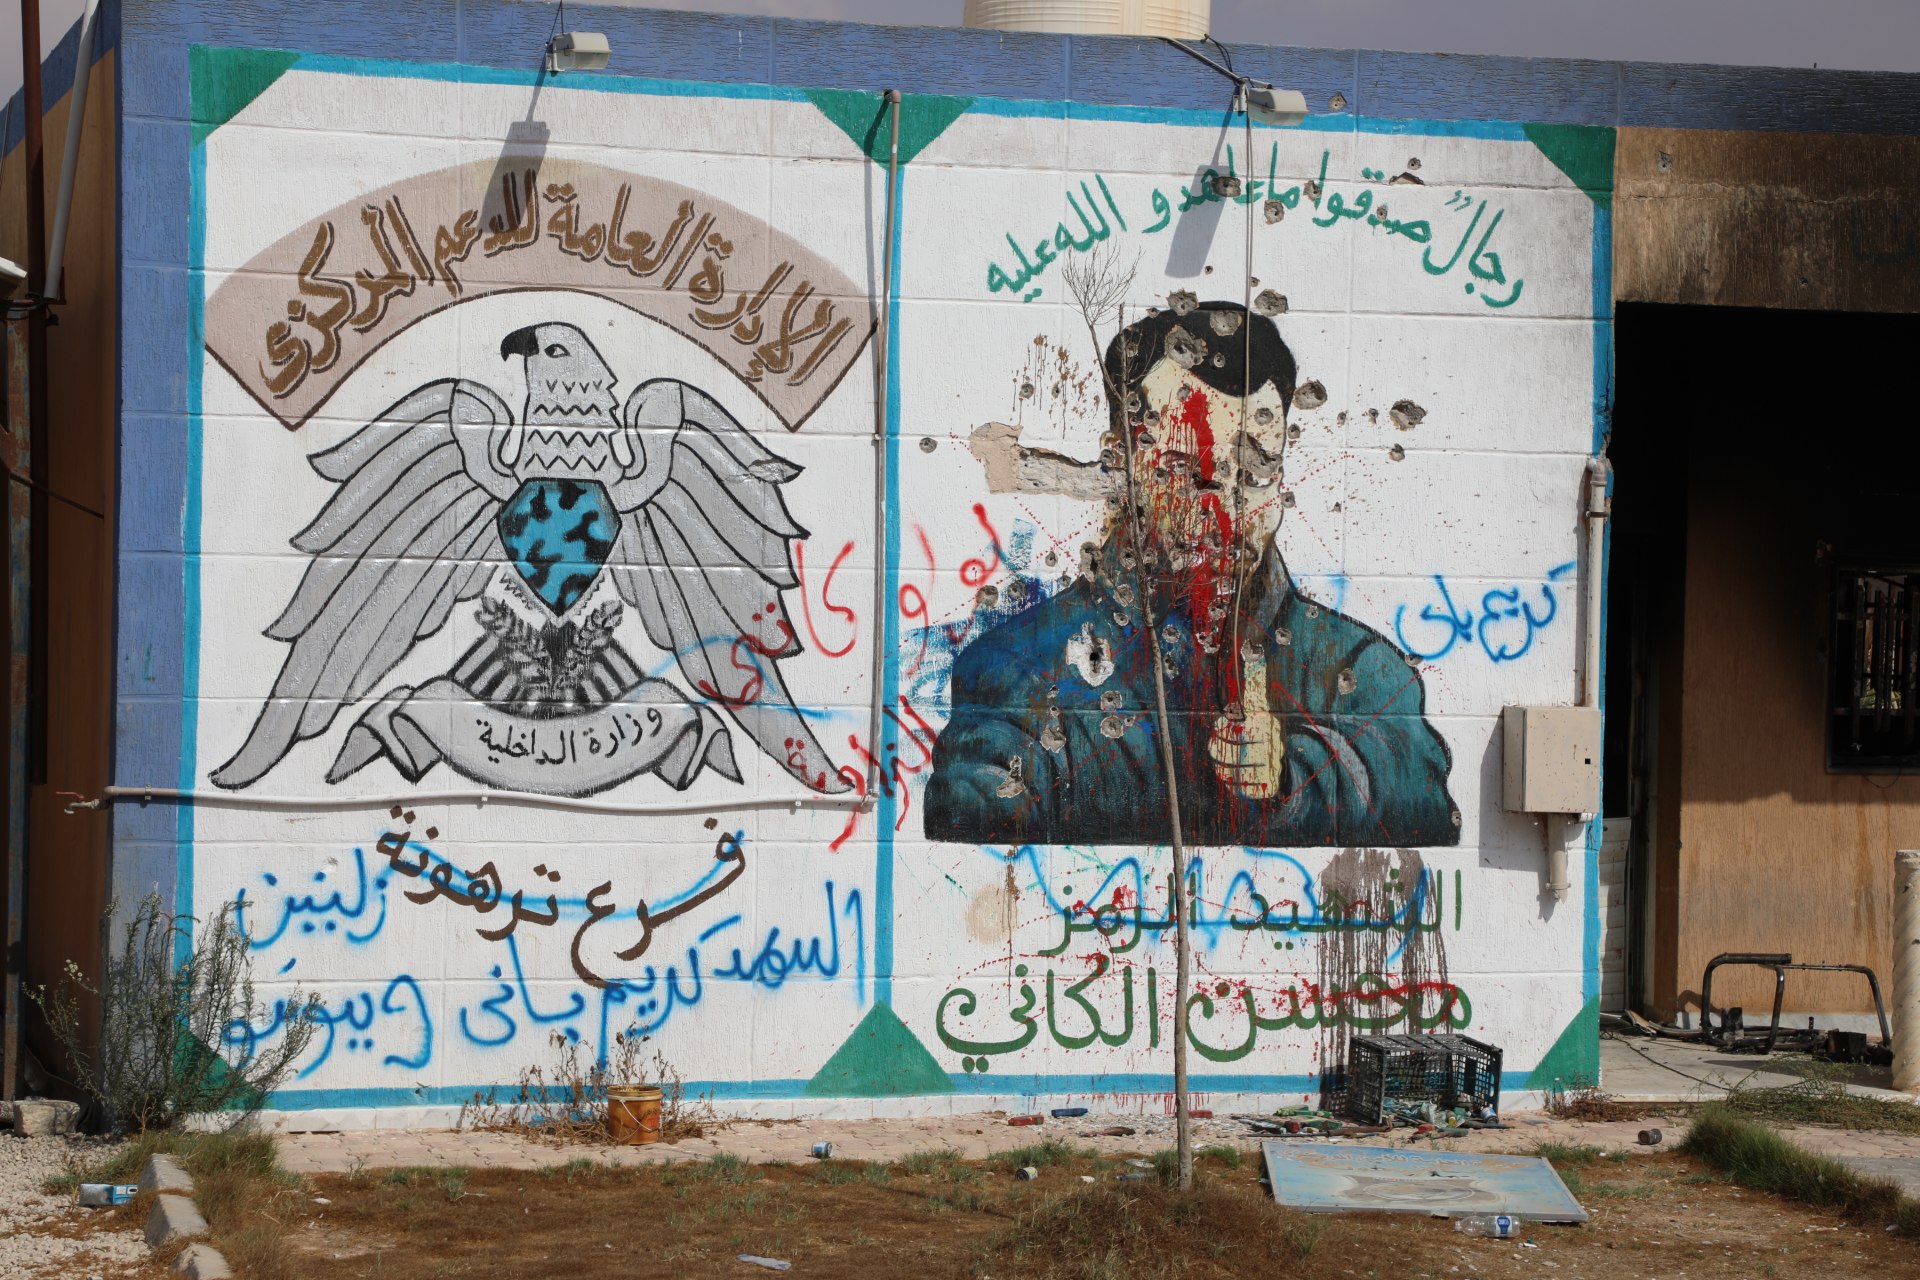 A mural of Mohsen al-Kani in a detention centre used by the Kaniyat (Supplied)